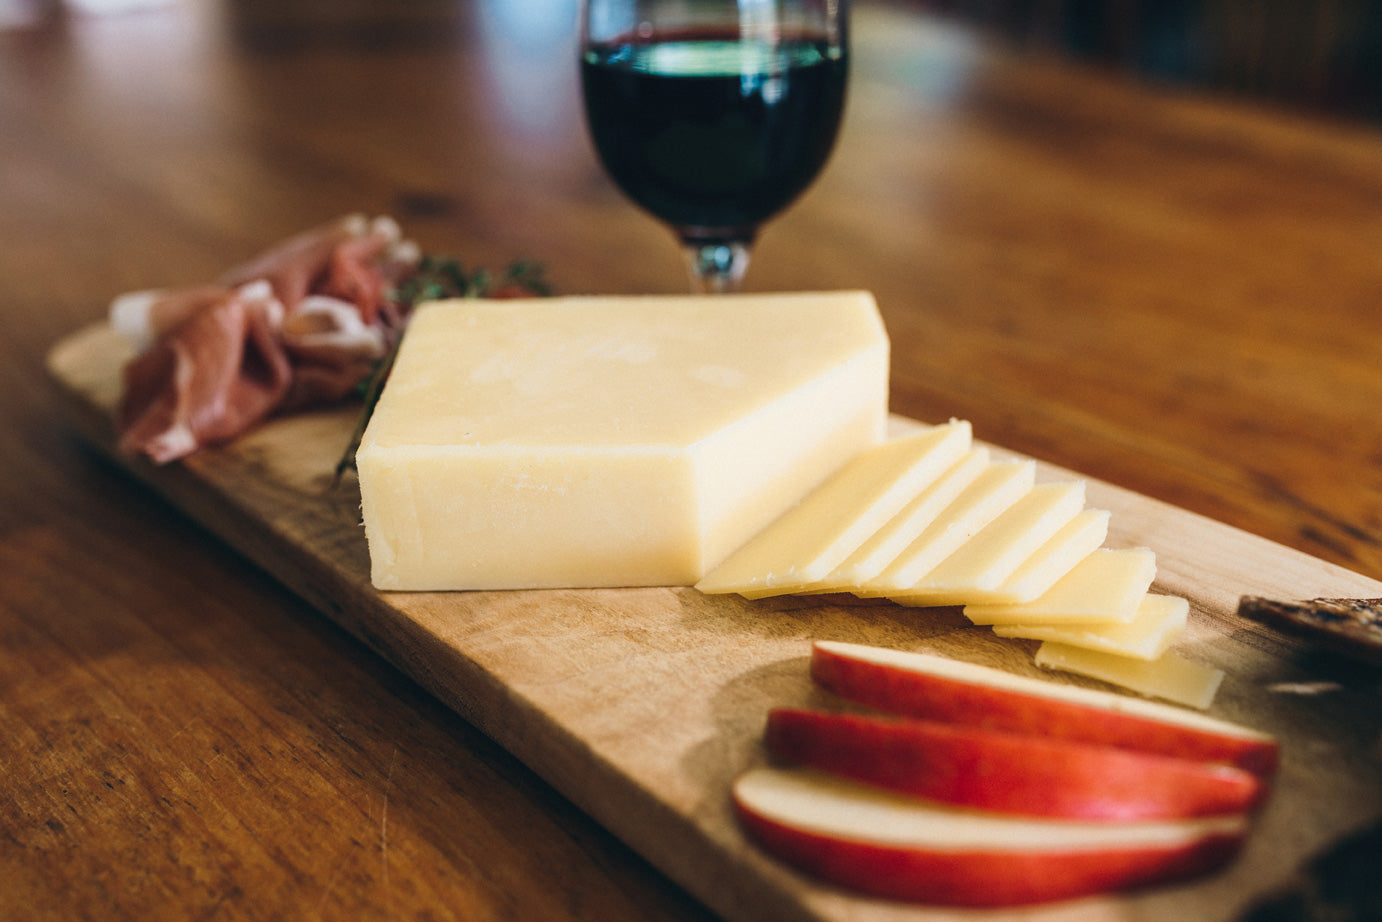 Mount Moriarty cheese is served on a wooden board with slices apples, sliced cured meats, and a glass of red wine.